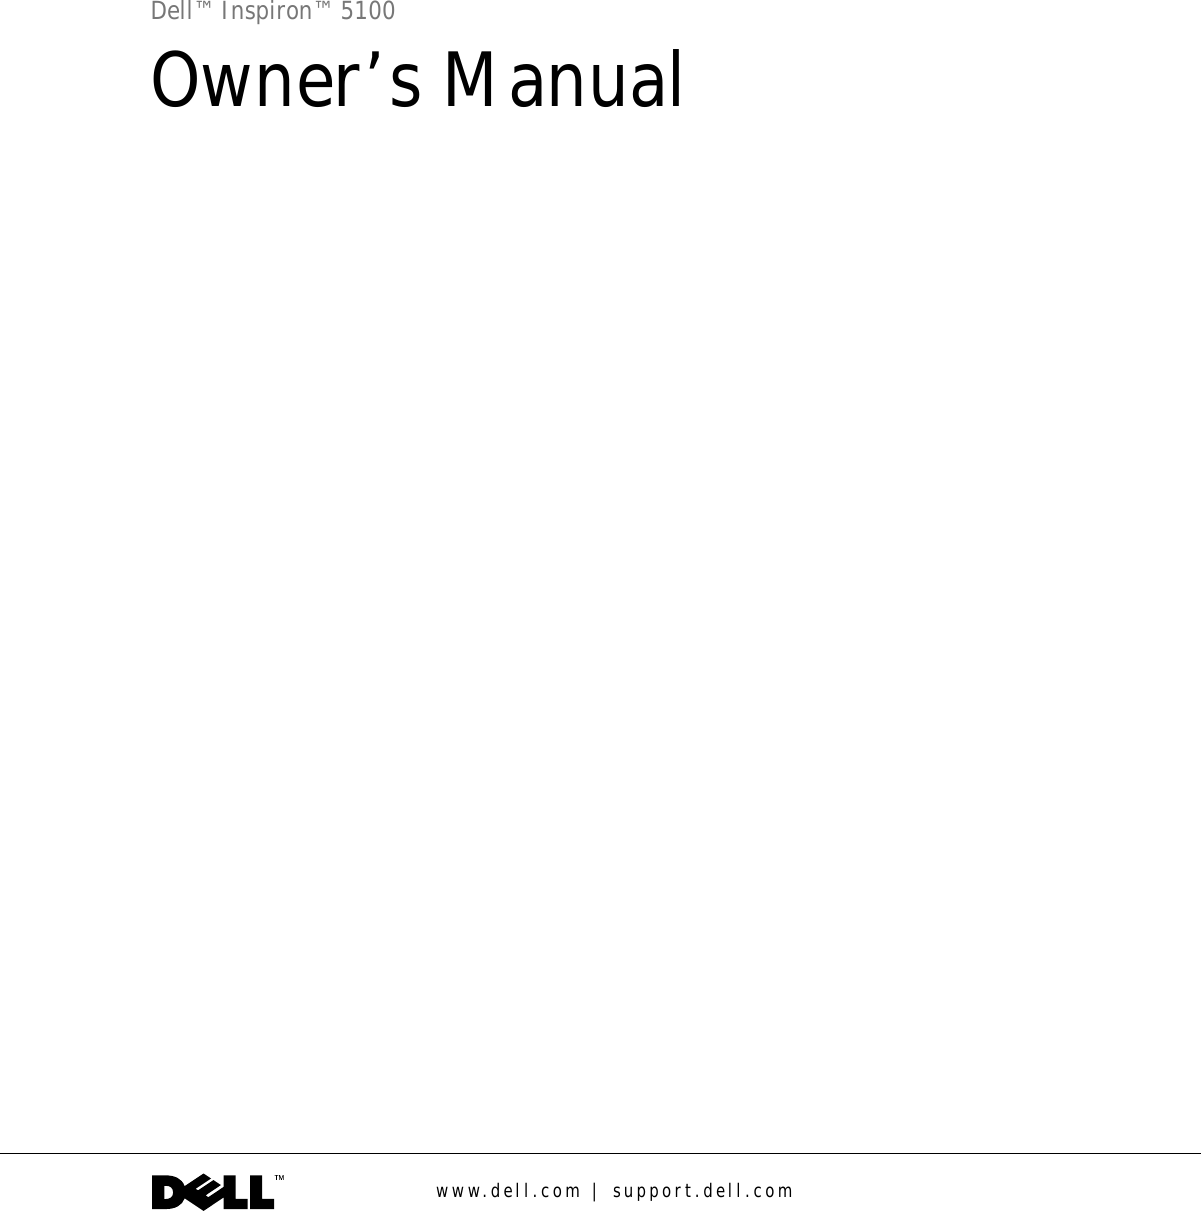 www.dell.com | support.dell.comDell™ Inspiron™ 5100Owner’s Manual